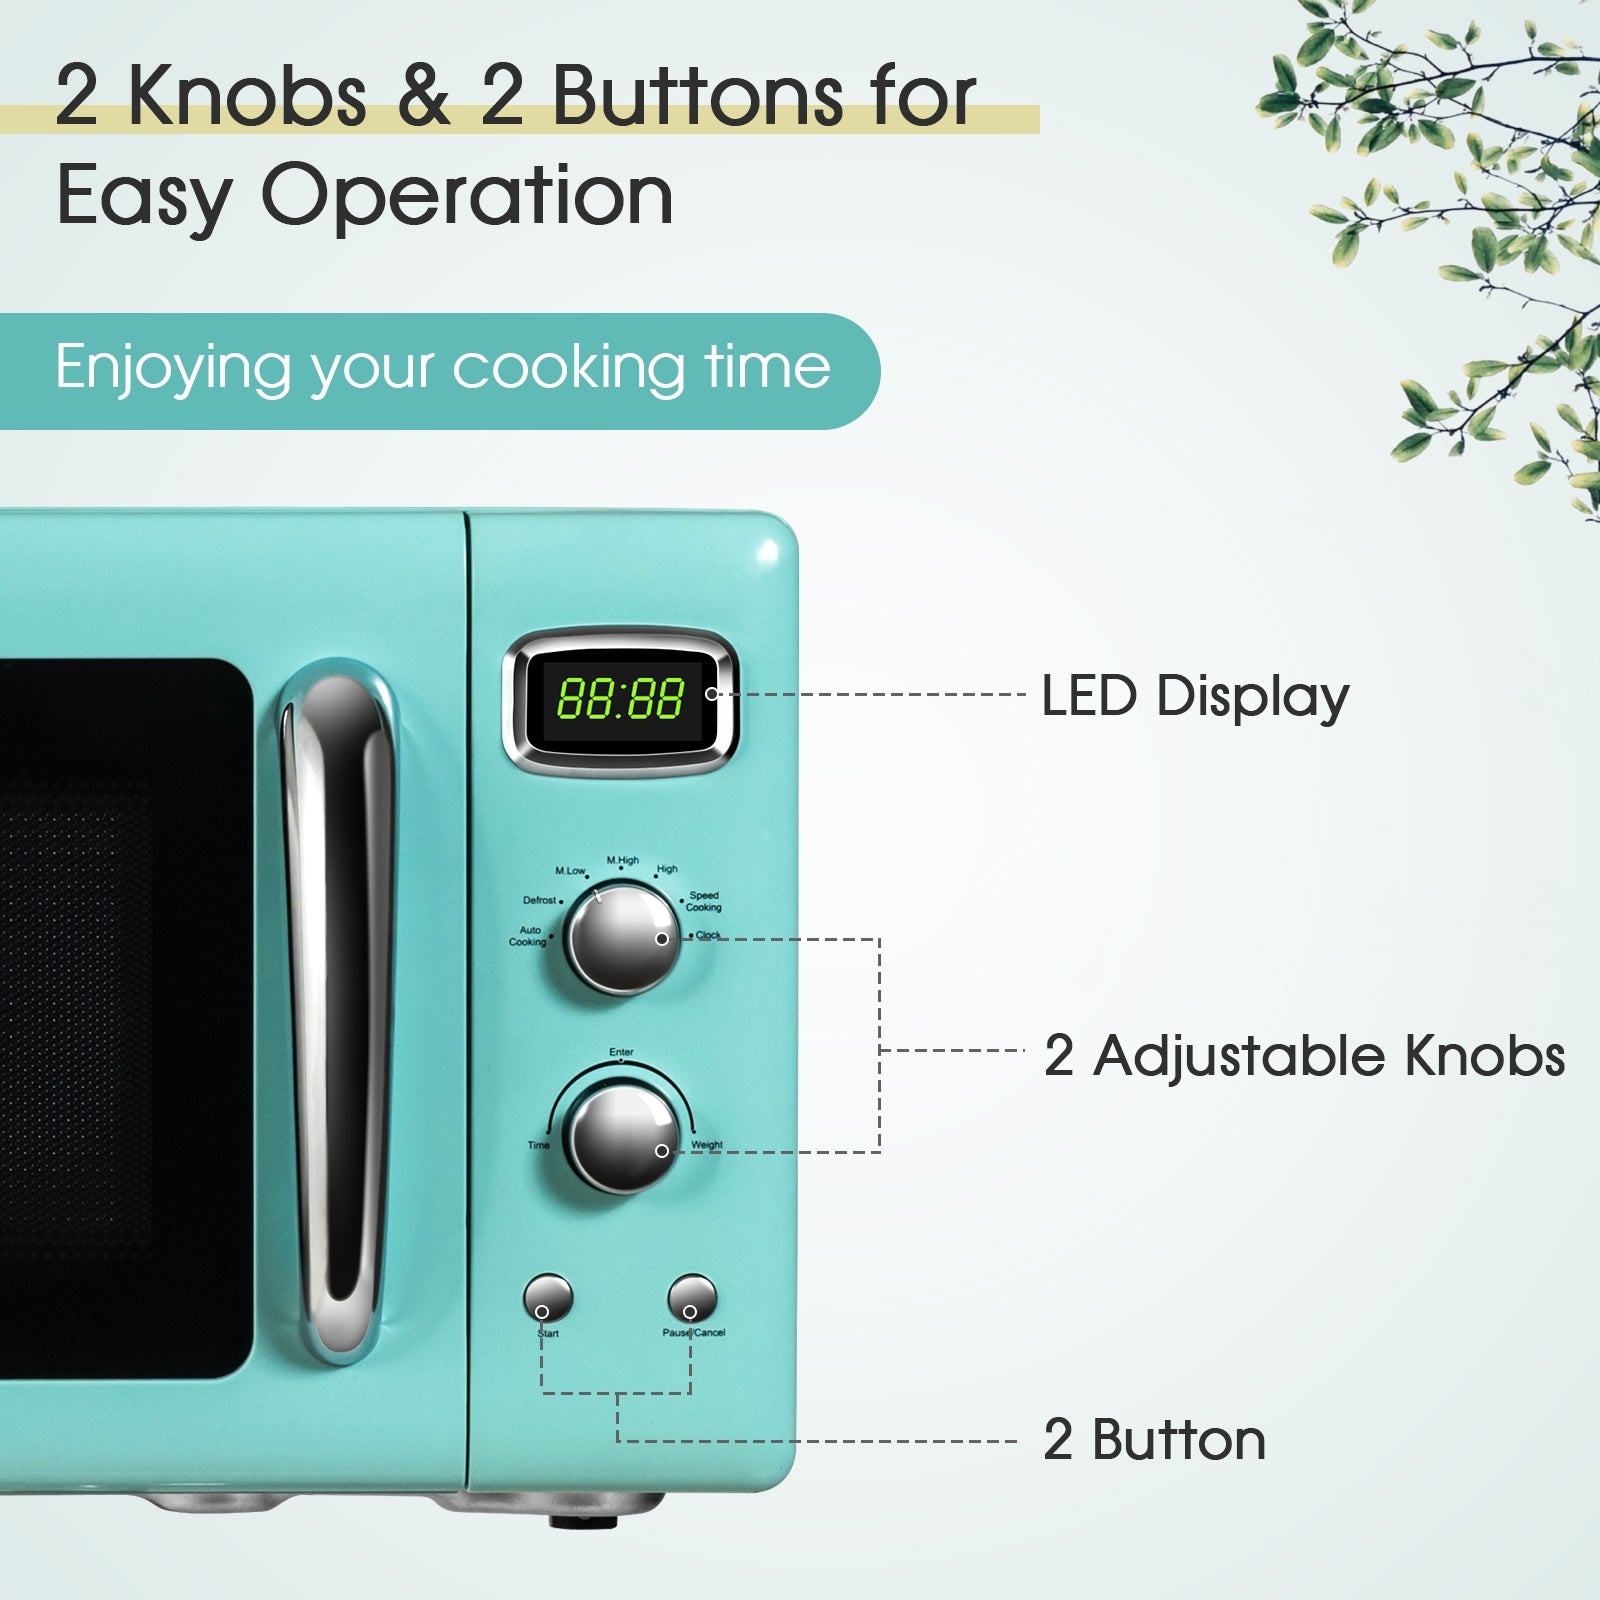 Simple operation with automatic reminders: Our microwave oven features two mechanical knobs and two buttons, allowing you to easily select power levels and set the cooking time up to 60 minutes. The LED display clearly shows the remaining cooking time, and when the cooking is complete, you'll hear three beeps as a reminder.